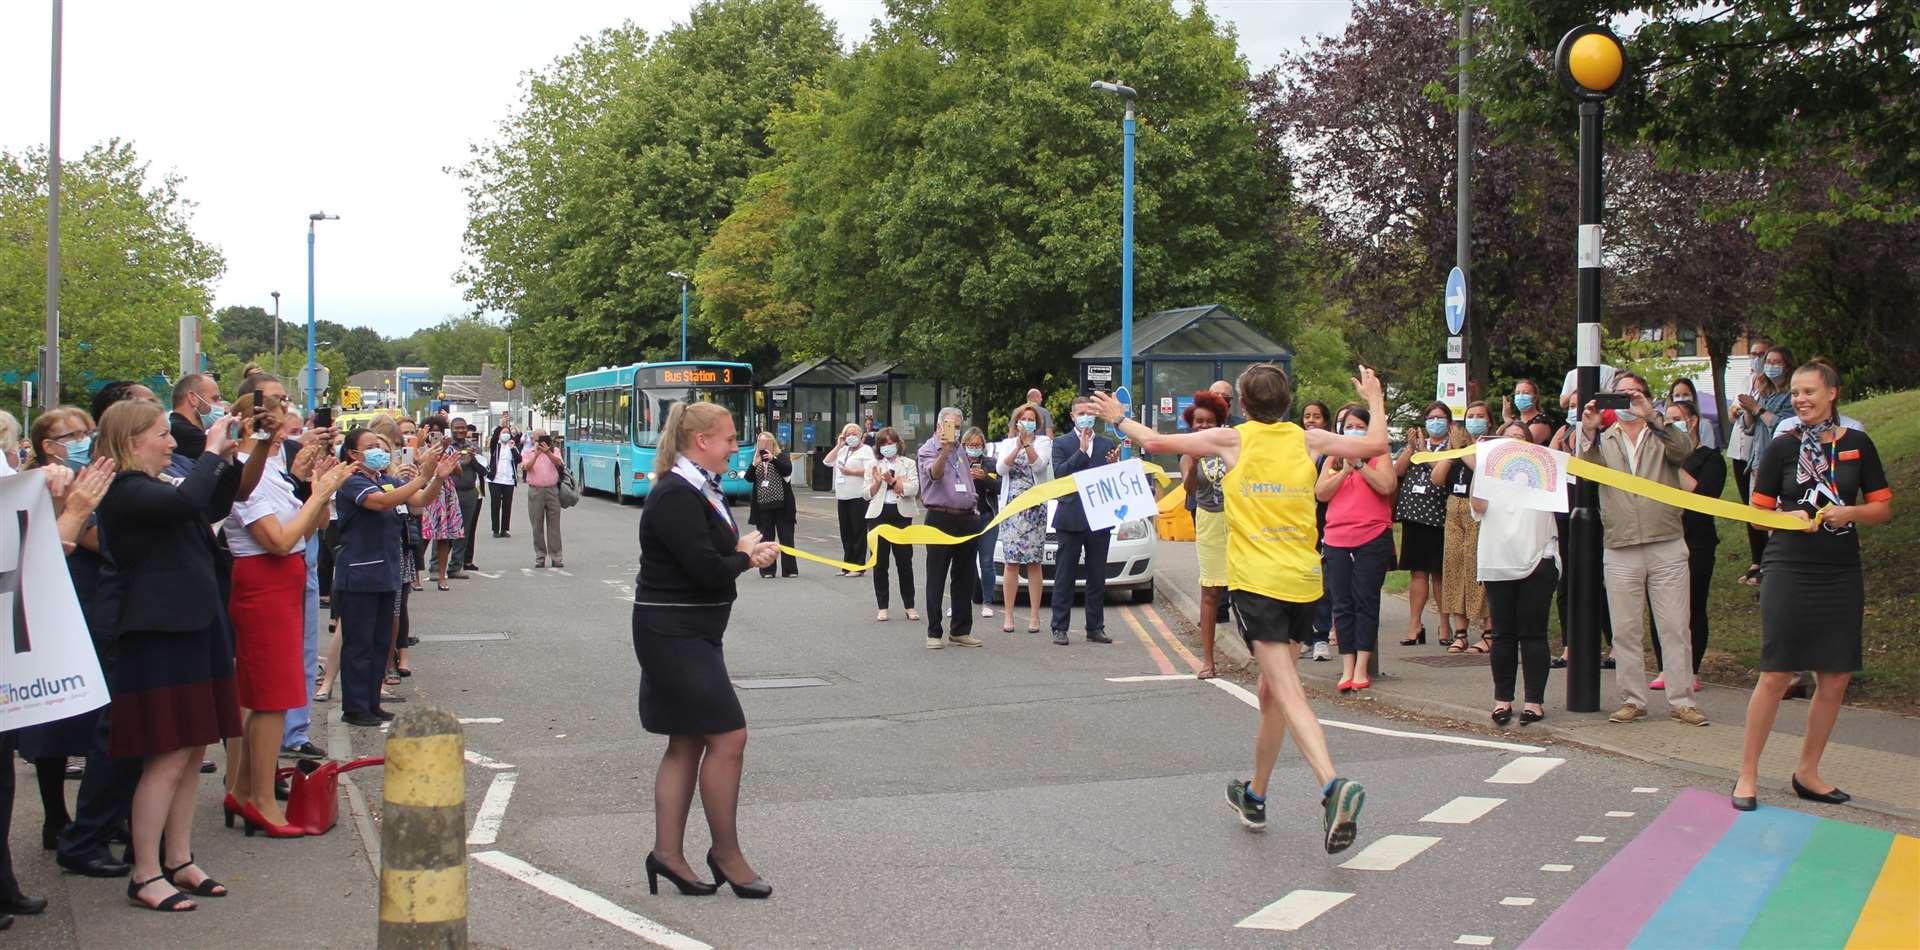 He crossed the finish line at Maidstone Hospital